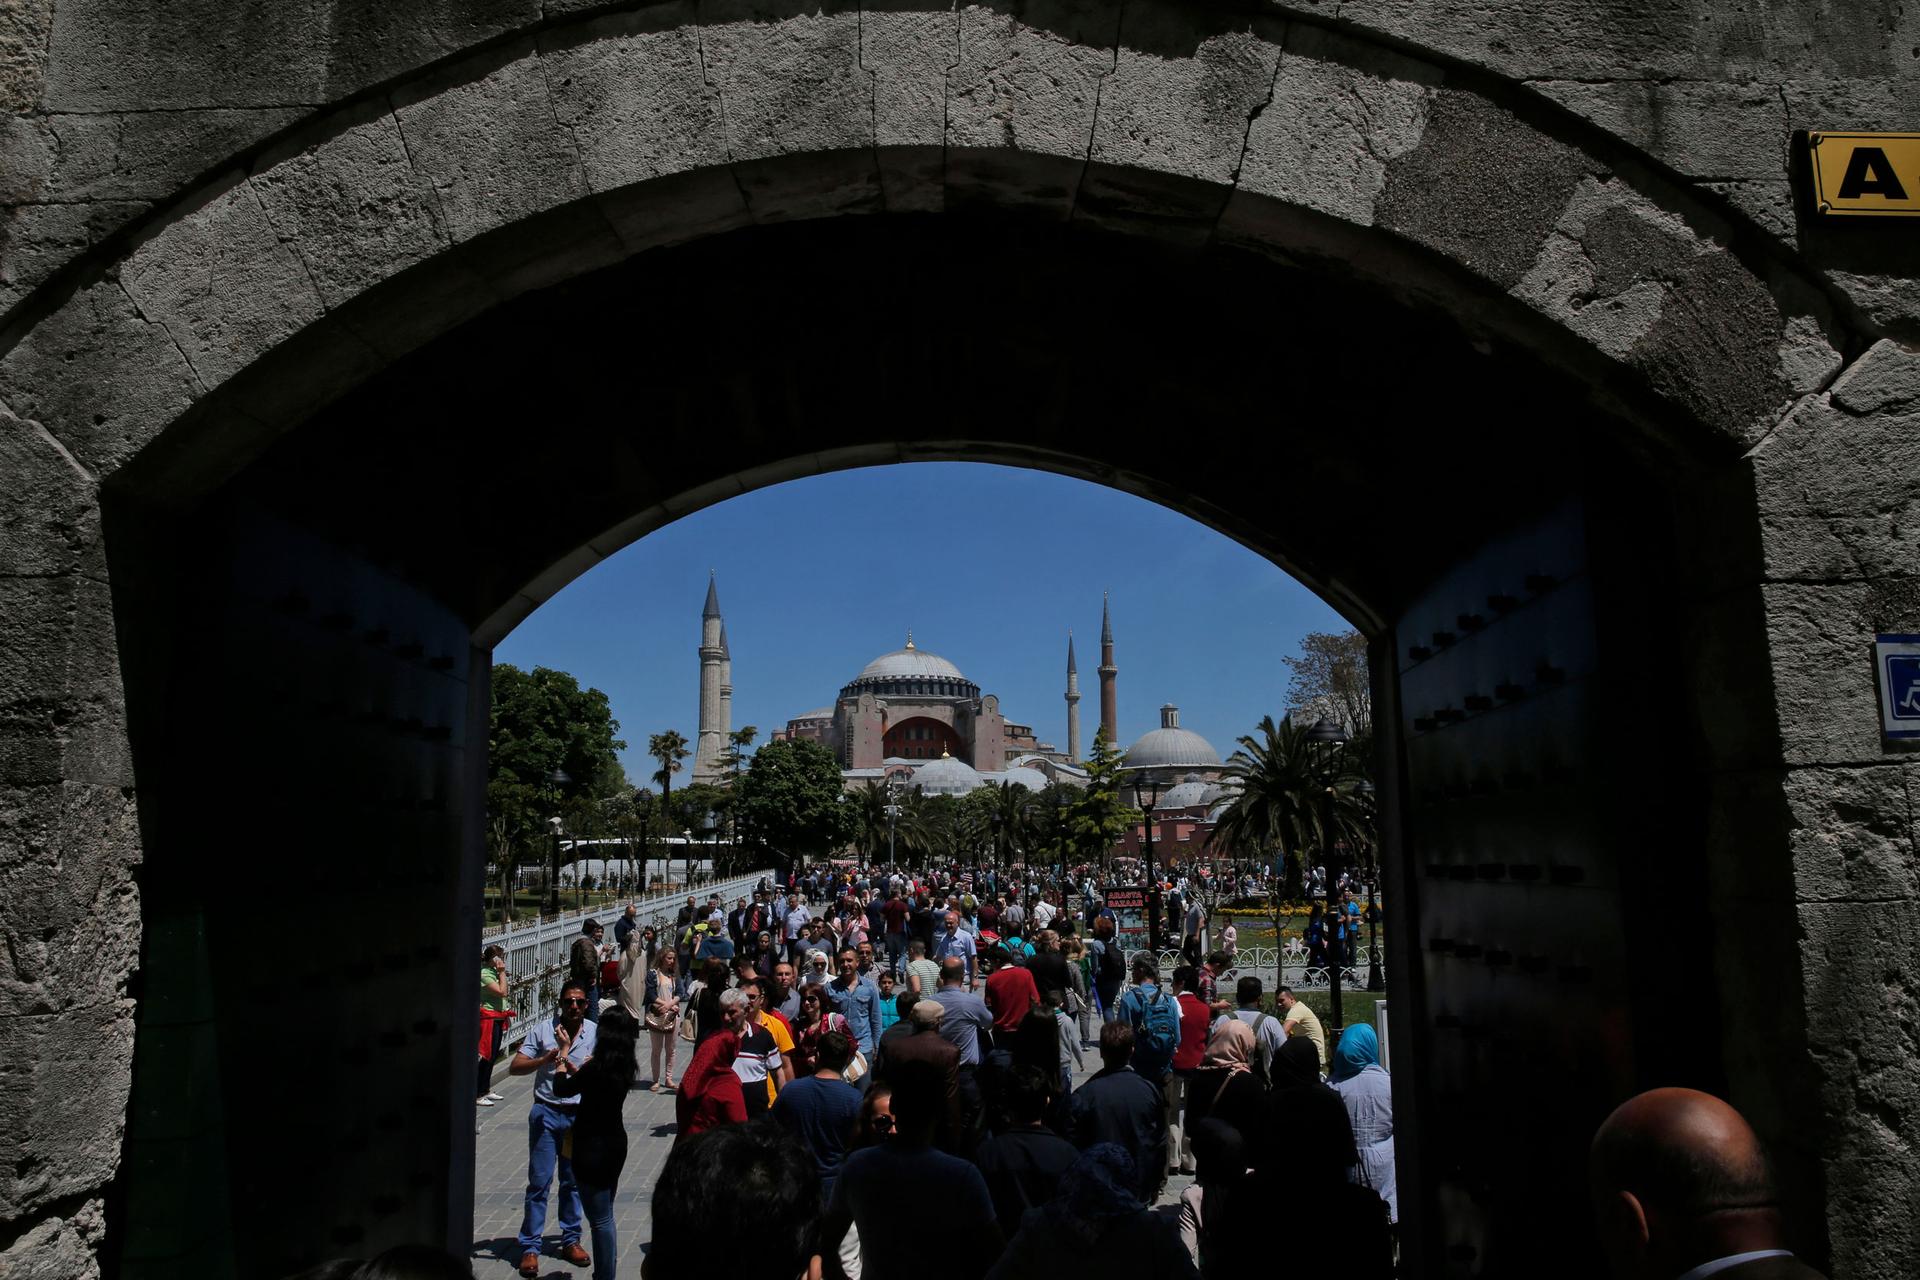 A large crowd of people are shown through an open under a stone passageway with the iconic Hagia Sophia in the distance.